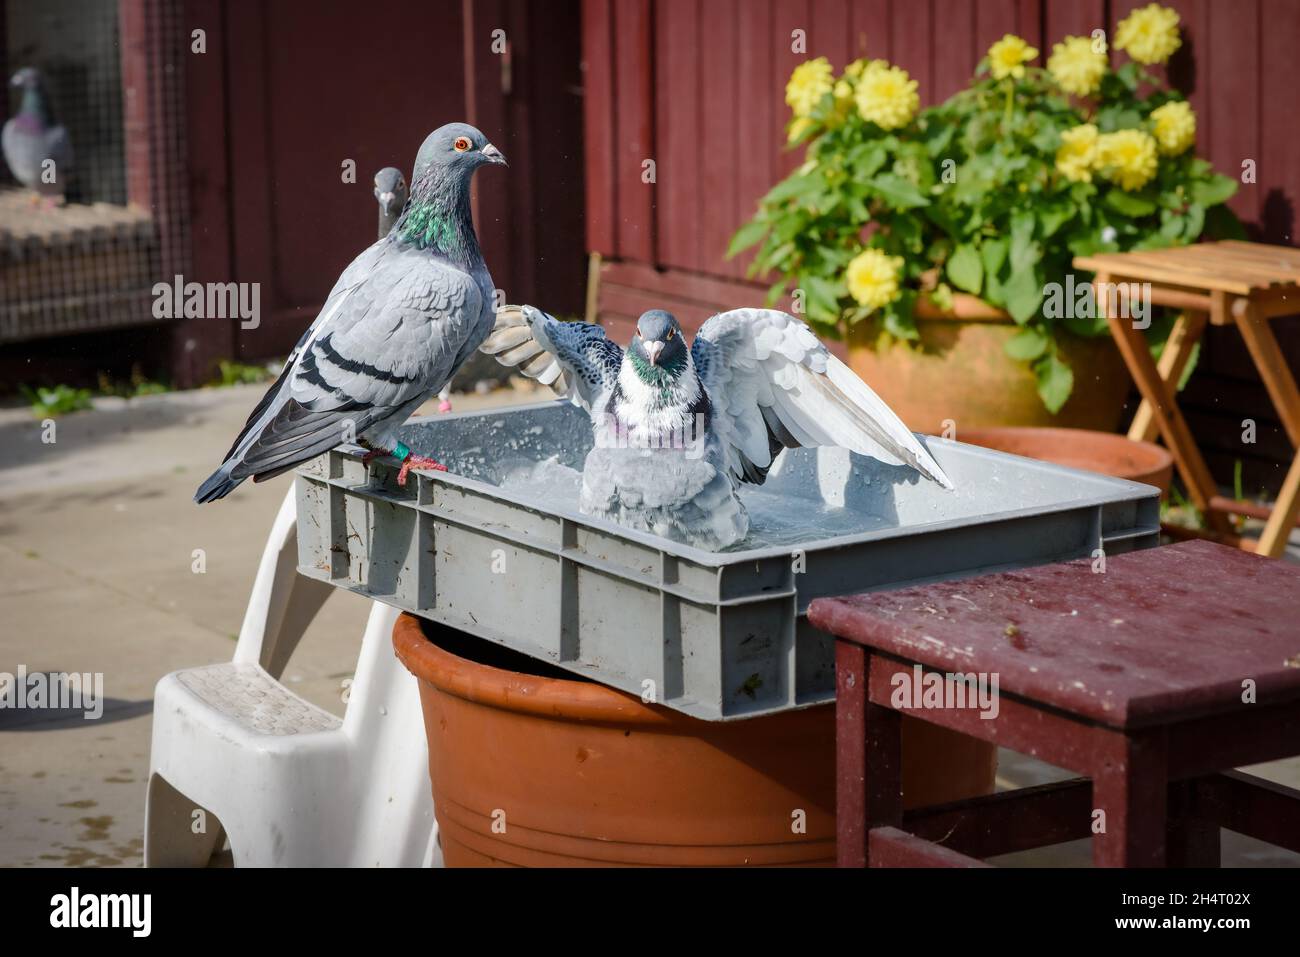 A few racing pigeons take a bath in front of their pigeon loft in the garden Stock Photo